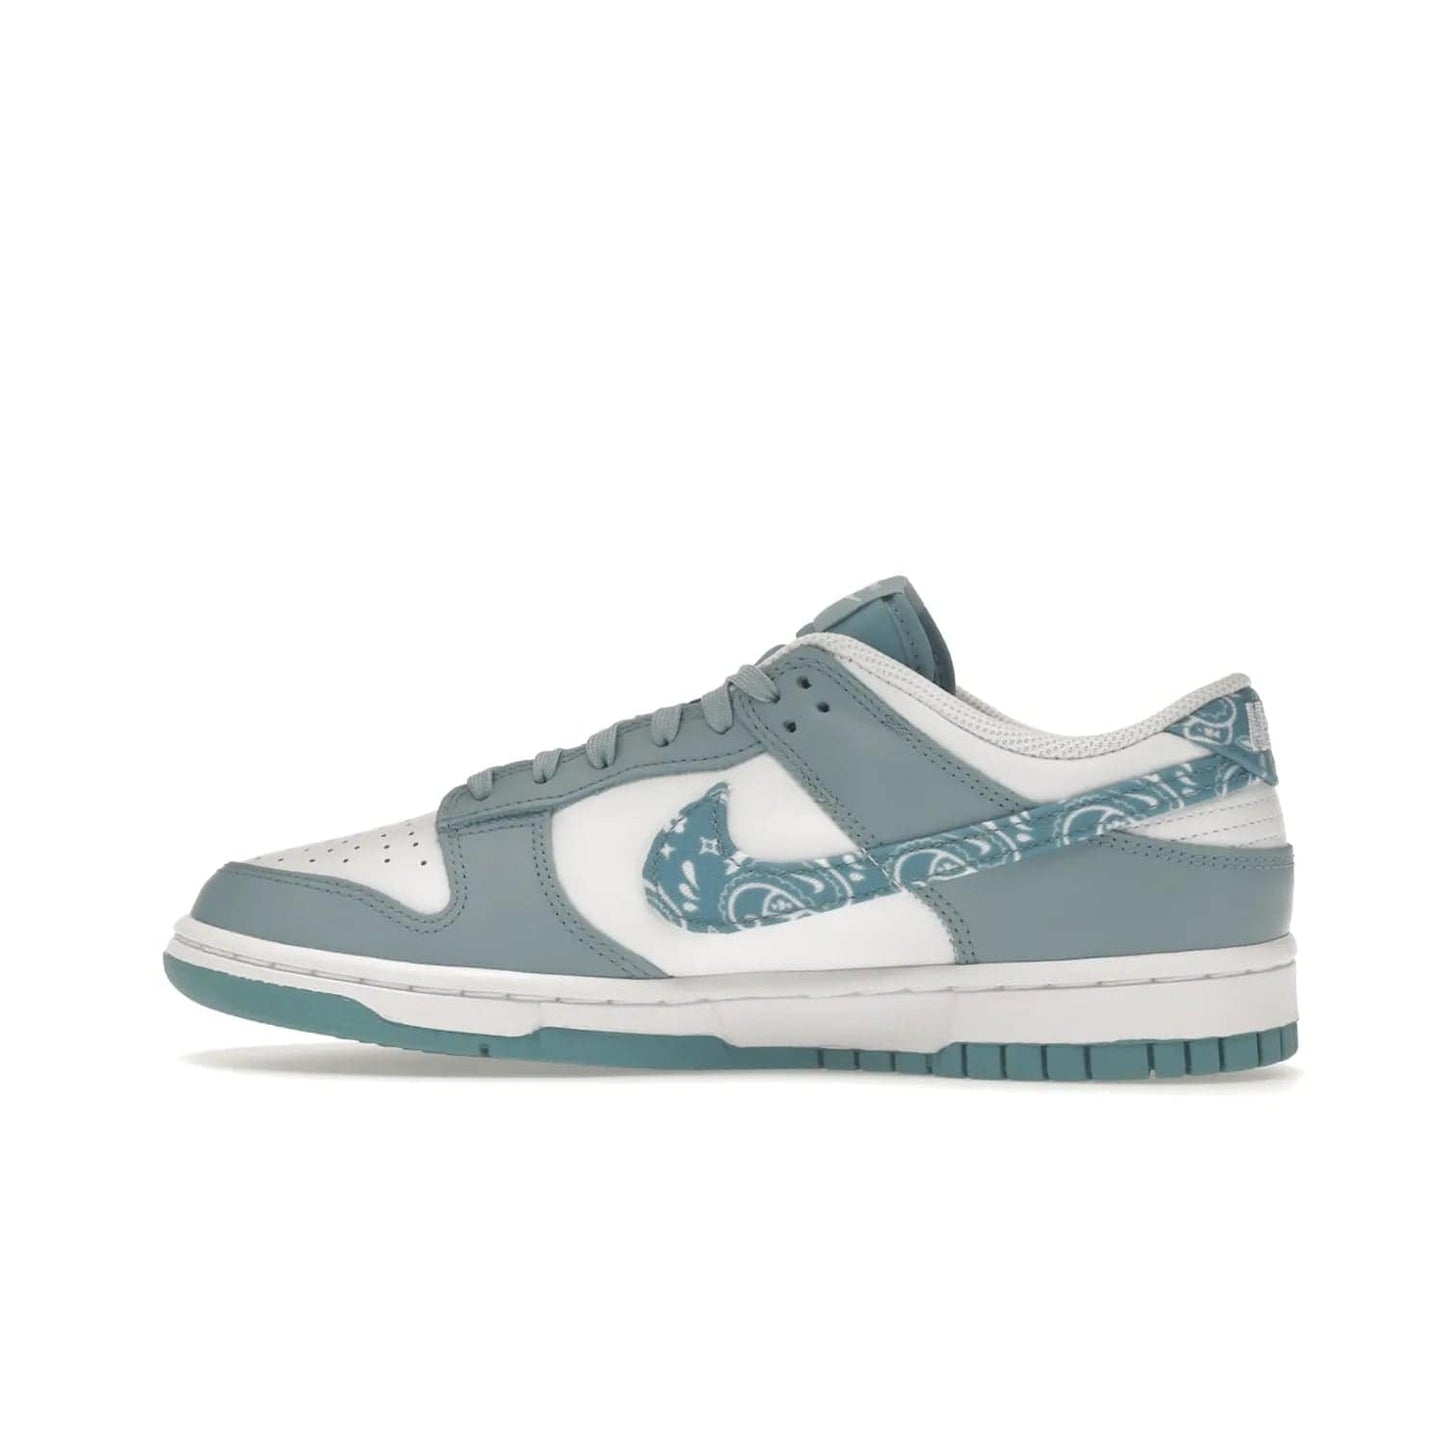 Nike Dunk Low Essential Paisley Pack Worn Blue (Women's) - Image 20 - Only at www.BallersClubKickz.com - Get the Nike Dunk Low Essential Paisley Pack Worn Blue (Women's) for style and comfort. White leather construction, light blue leather overlays, canvas Swooshes and matching heel tabs offer a rich blue hue. Finished by a white and light blue sole, this classic Nike Dunk is the perfect addition to any wardrobe. Released in March 2022.